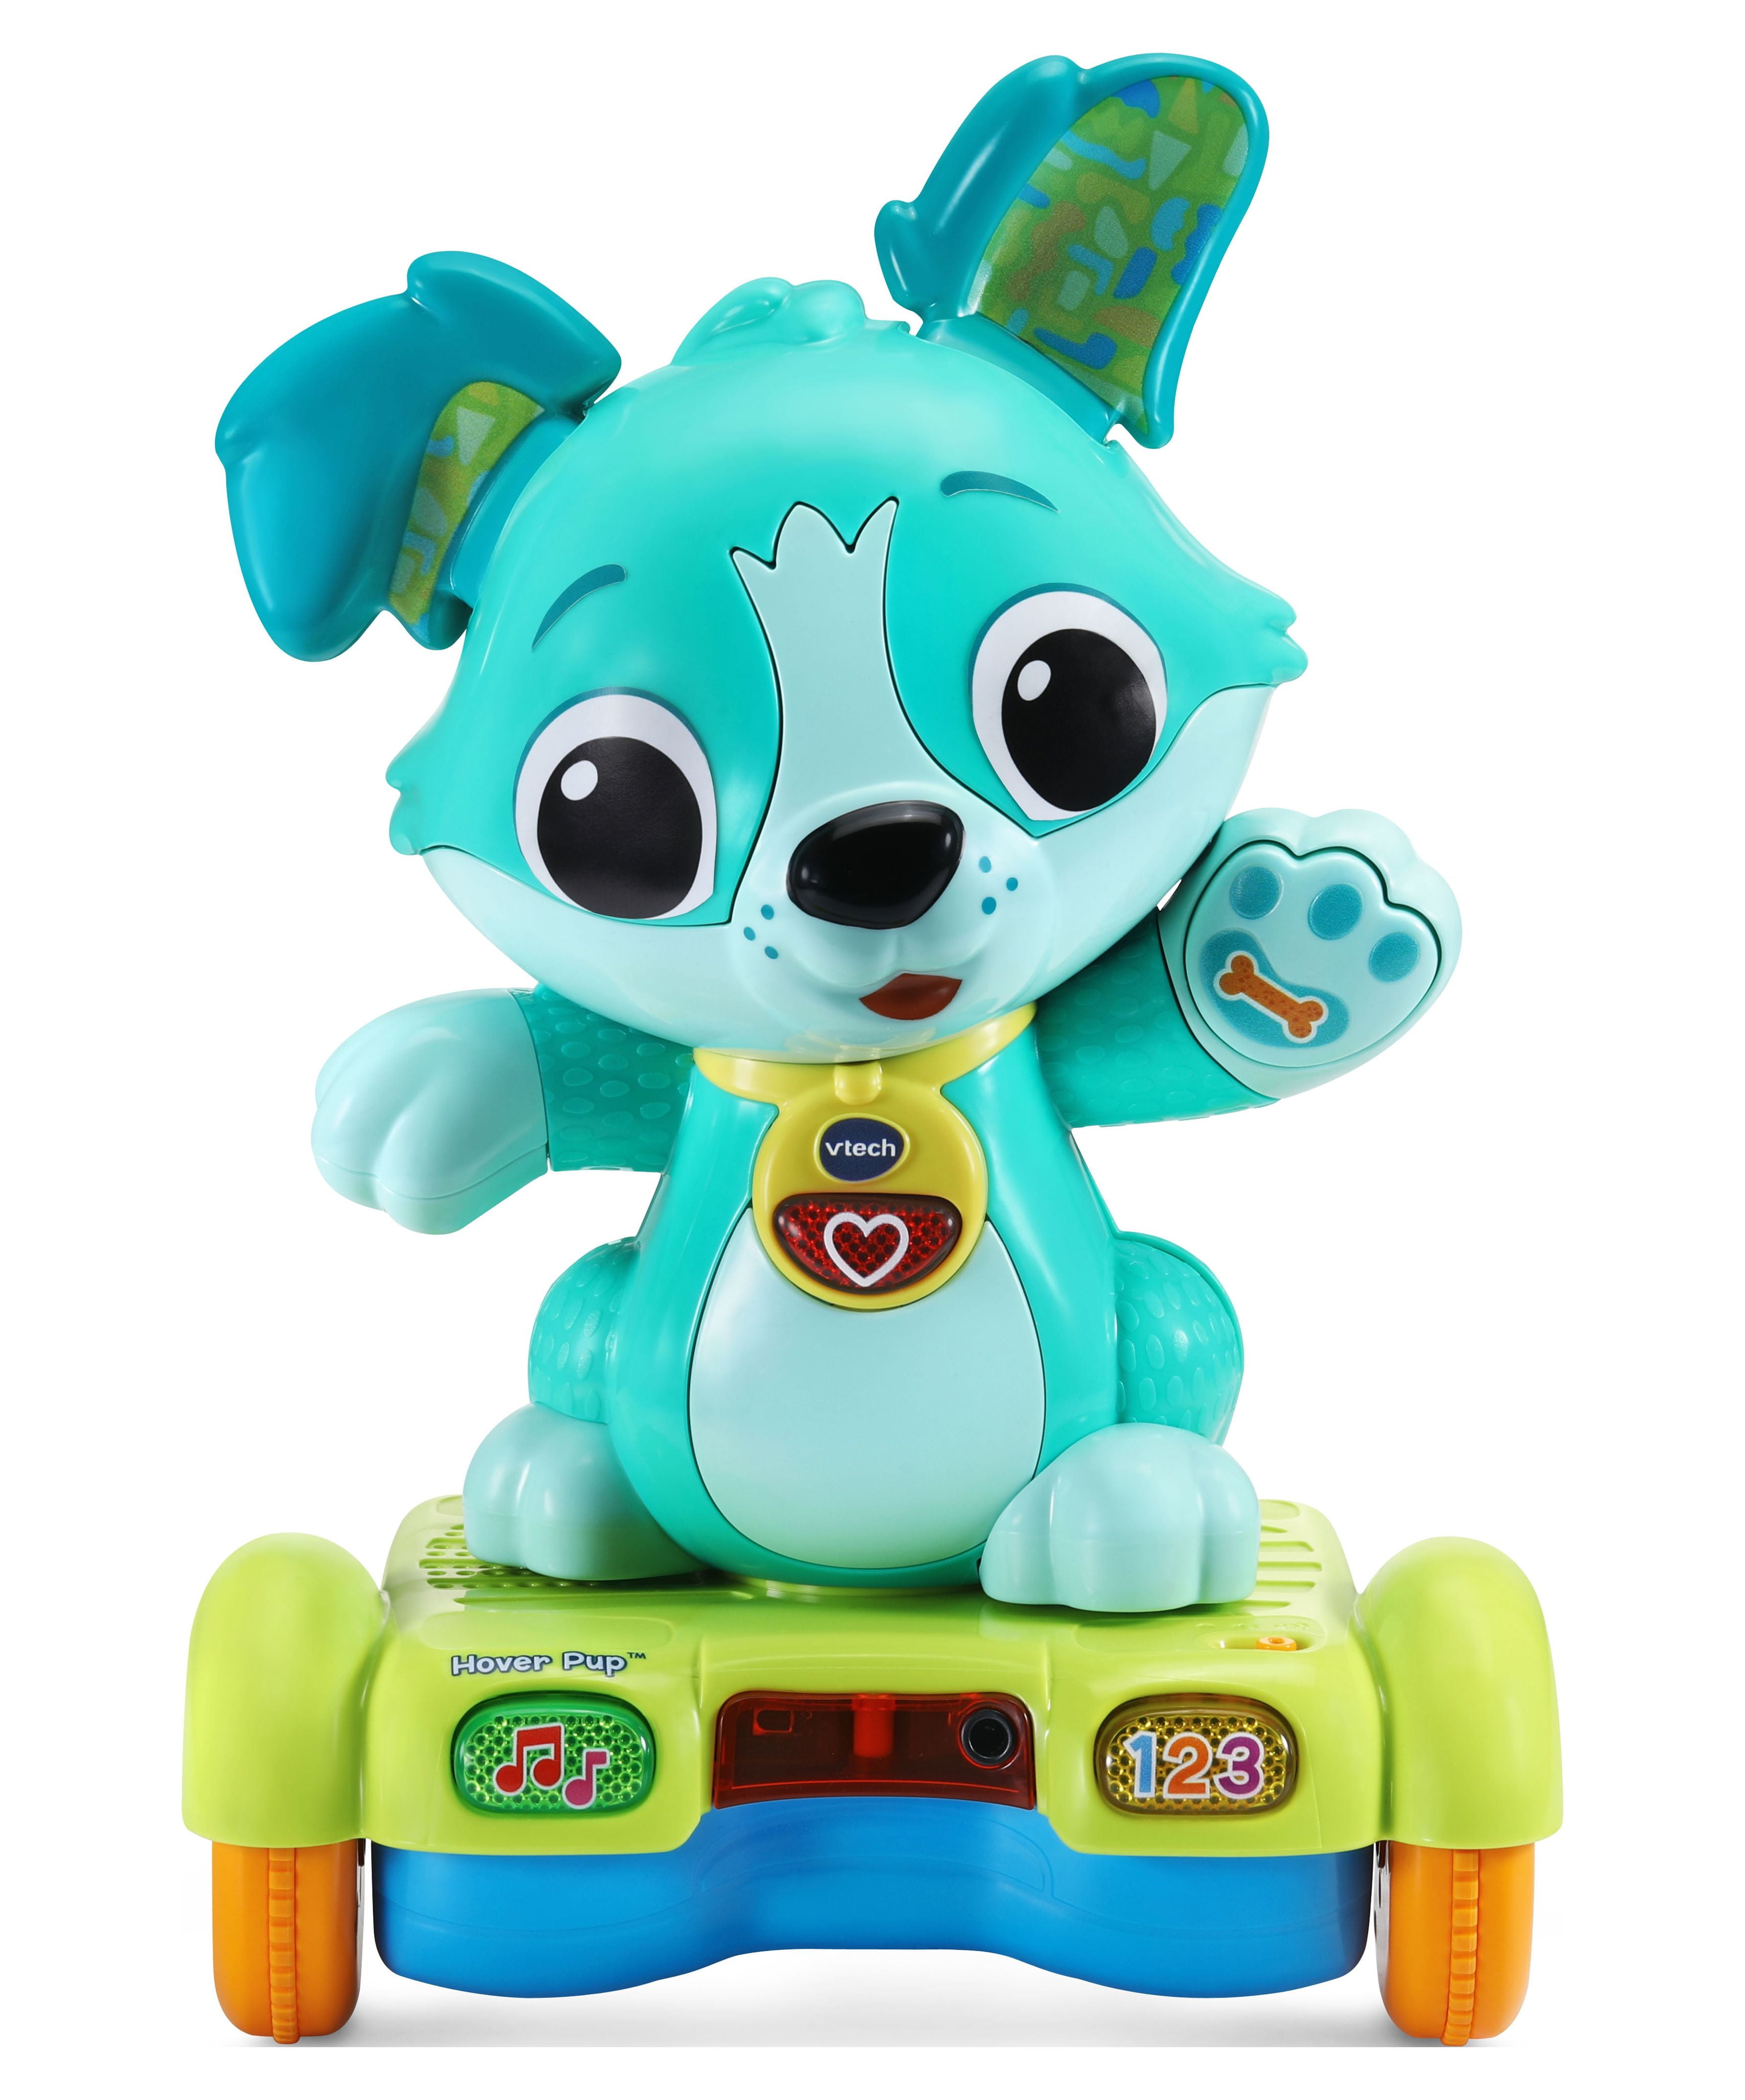 VTech Smarty Pets Puppy Dog, Interactive Moveable Electronic, Blue, Working